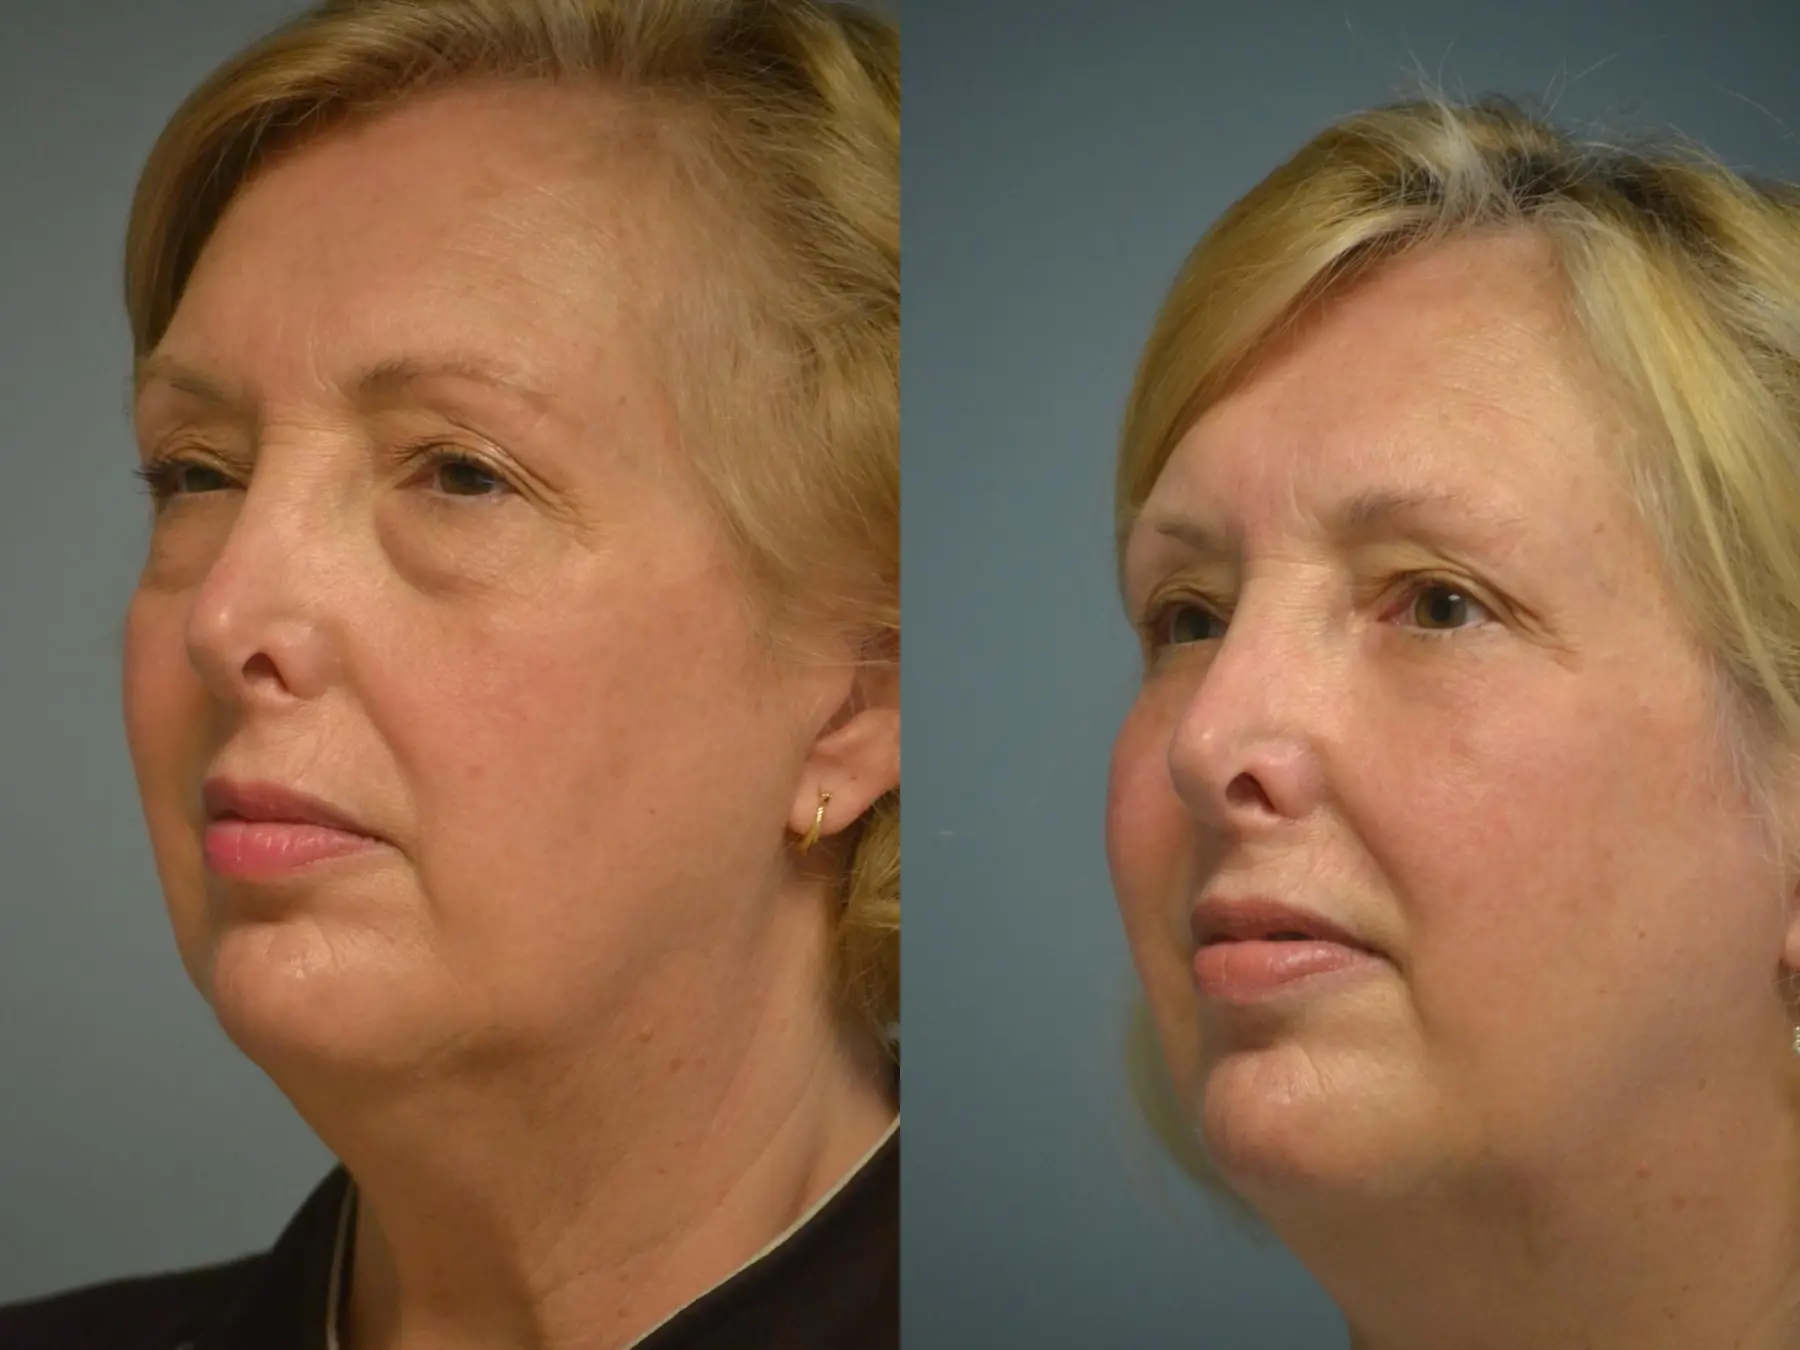 Fat Transfer - Face: Patient 1 - Before and After 2